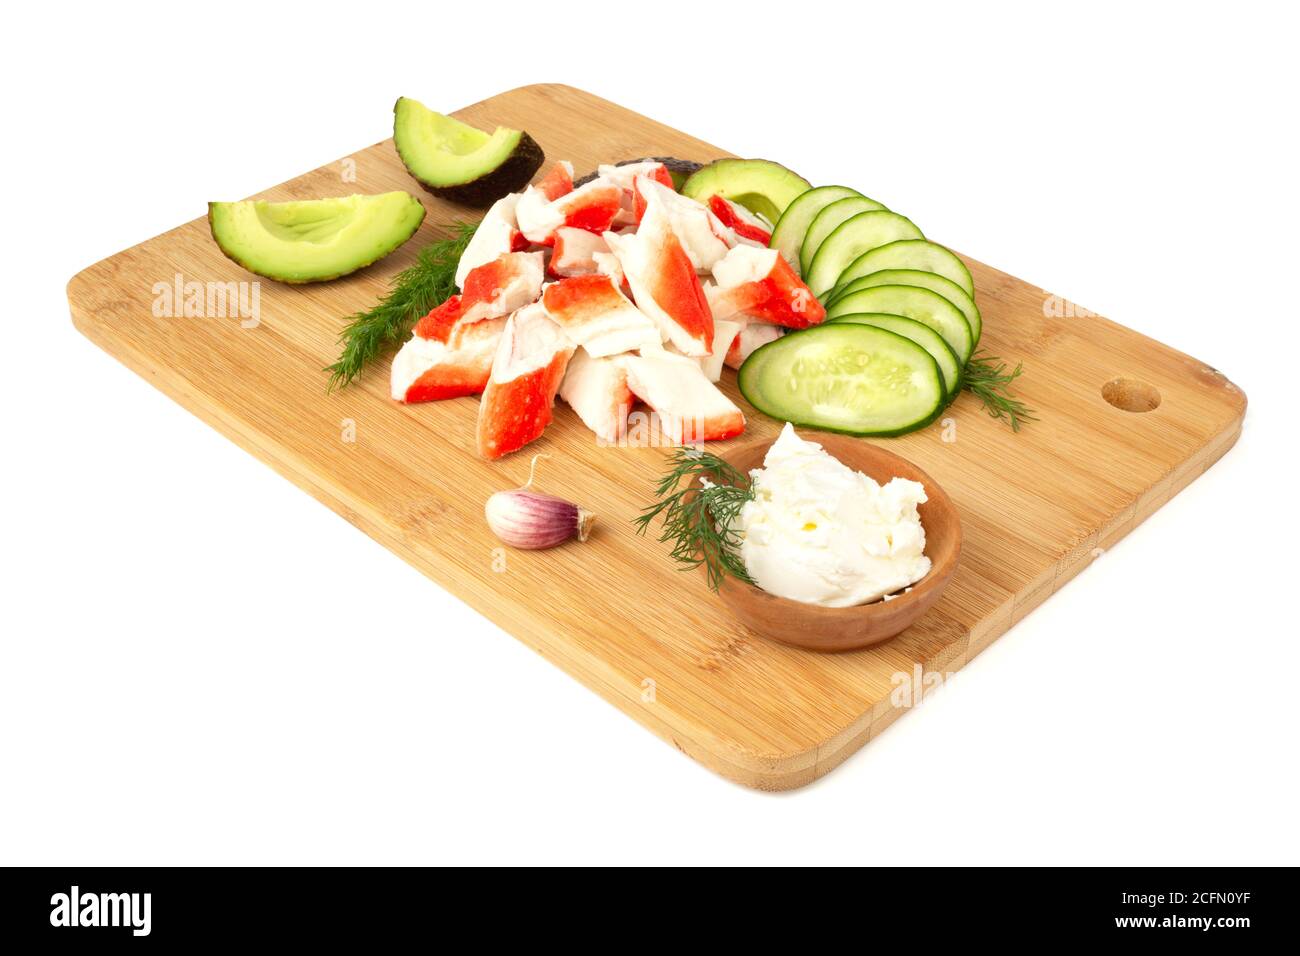 Crab sticks cut meat and vegetables avocado cut cucumbers on wooden cutting board isolated on white background Stock Photo